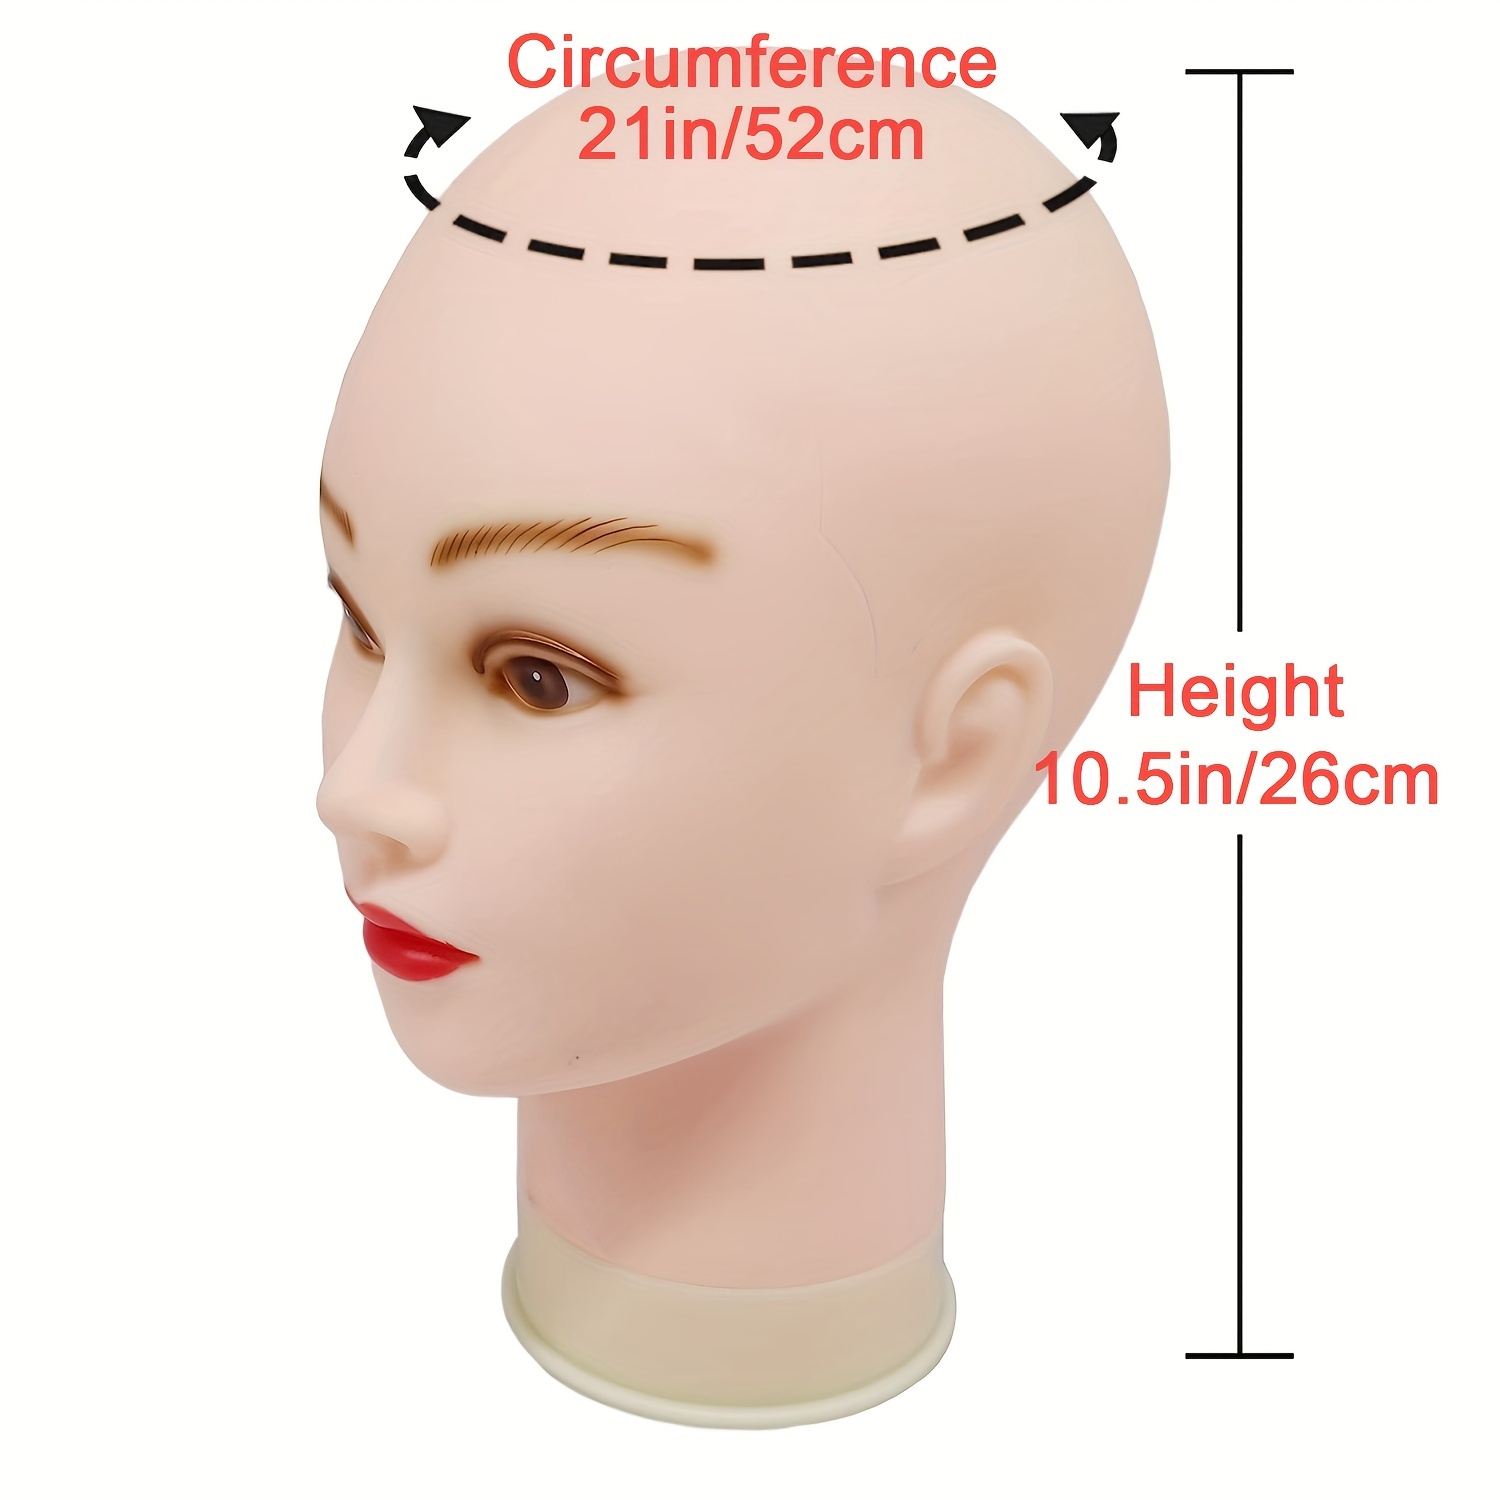 A H S Wig Making Head Bald Mannequin Making Display Hat Display